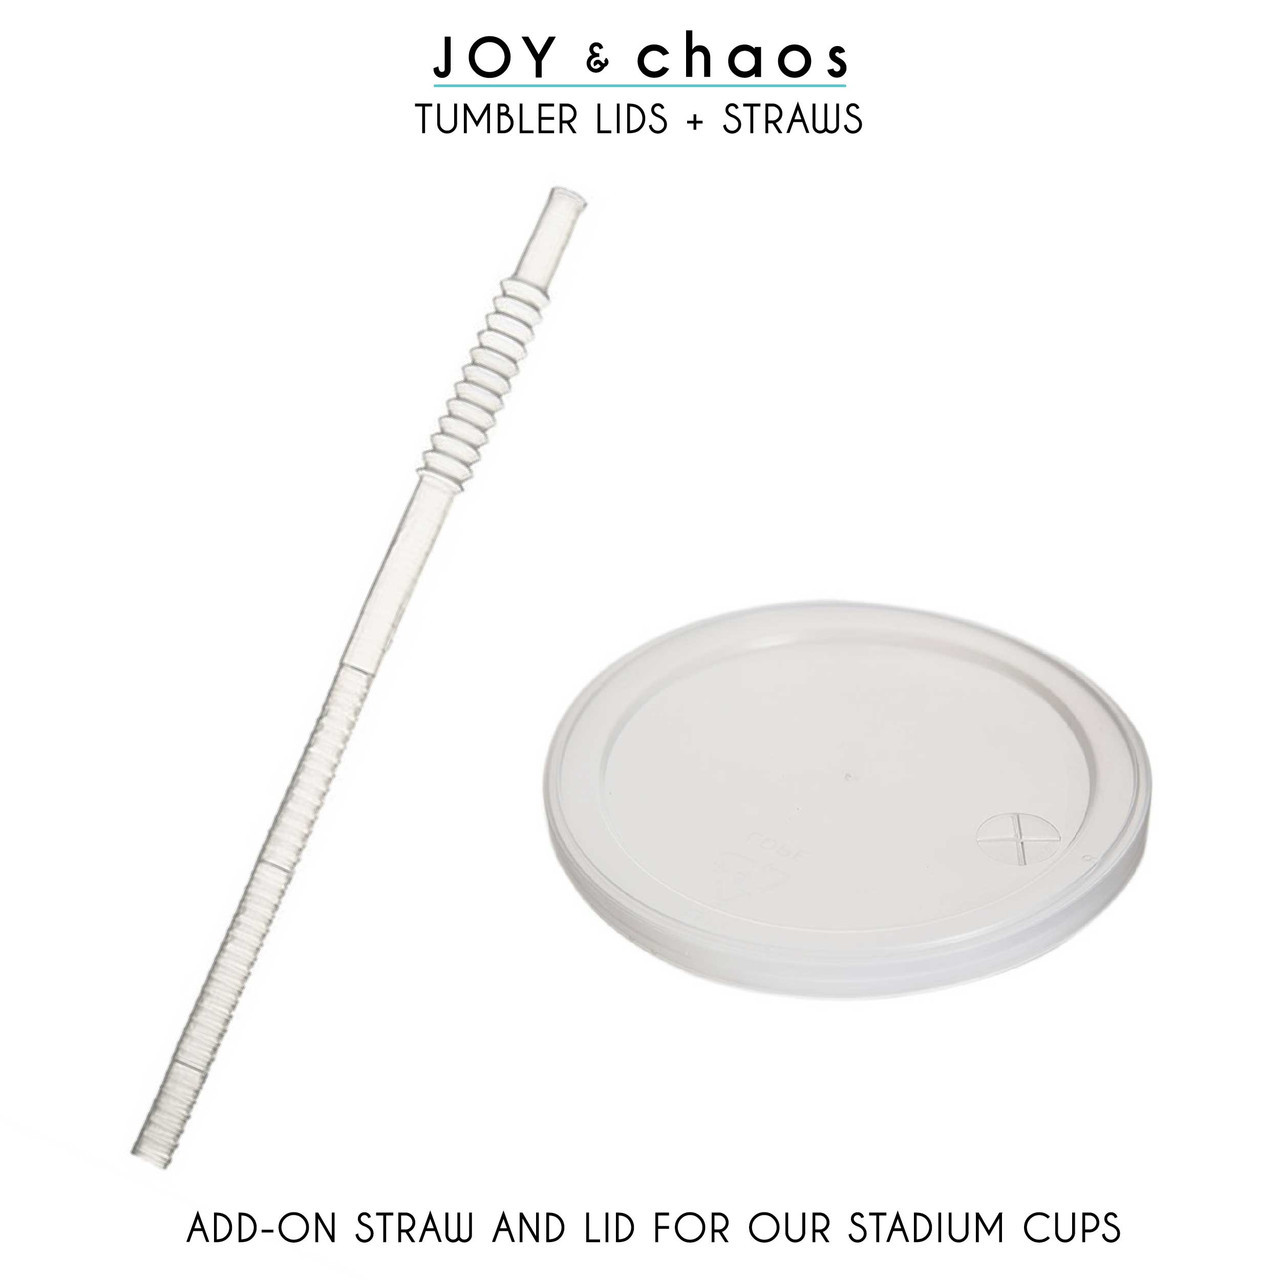 https://cdn11.bigcommerce.com/s-5grzuu6/images/stencil/1280x1280/products/6704/55791/Plastic-Cup-Lids-and-Straws__39874.1672182894.1280.1280__04554.1695762192.jpg?c=2